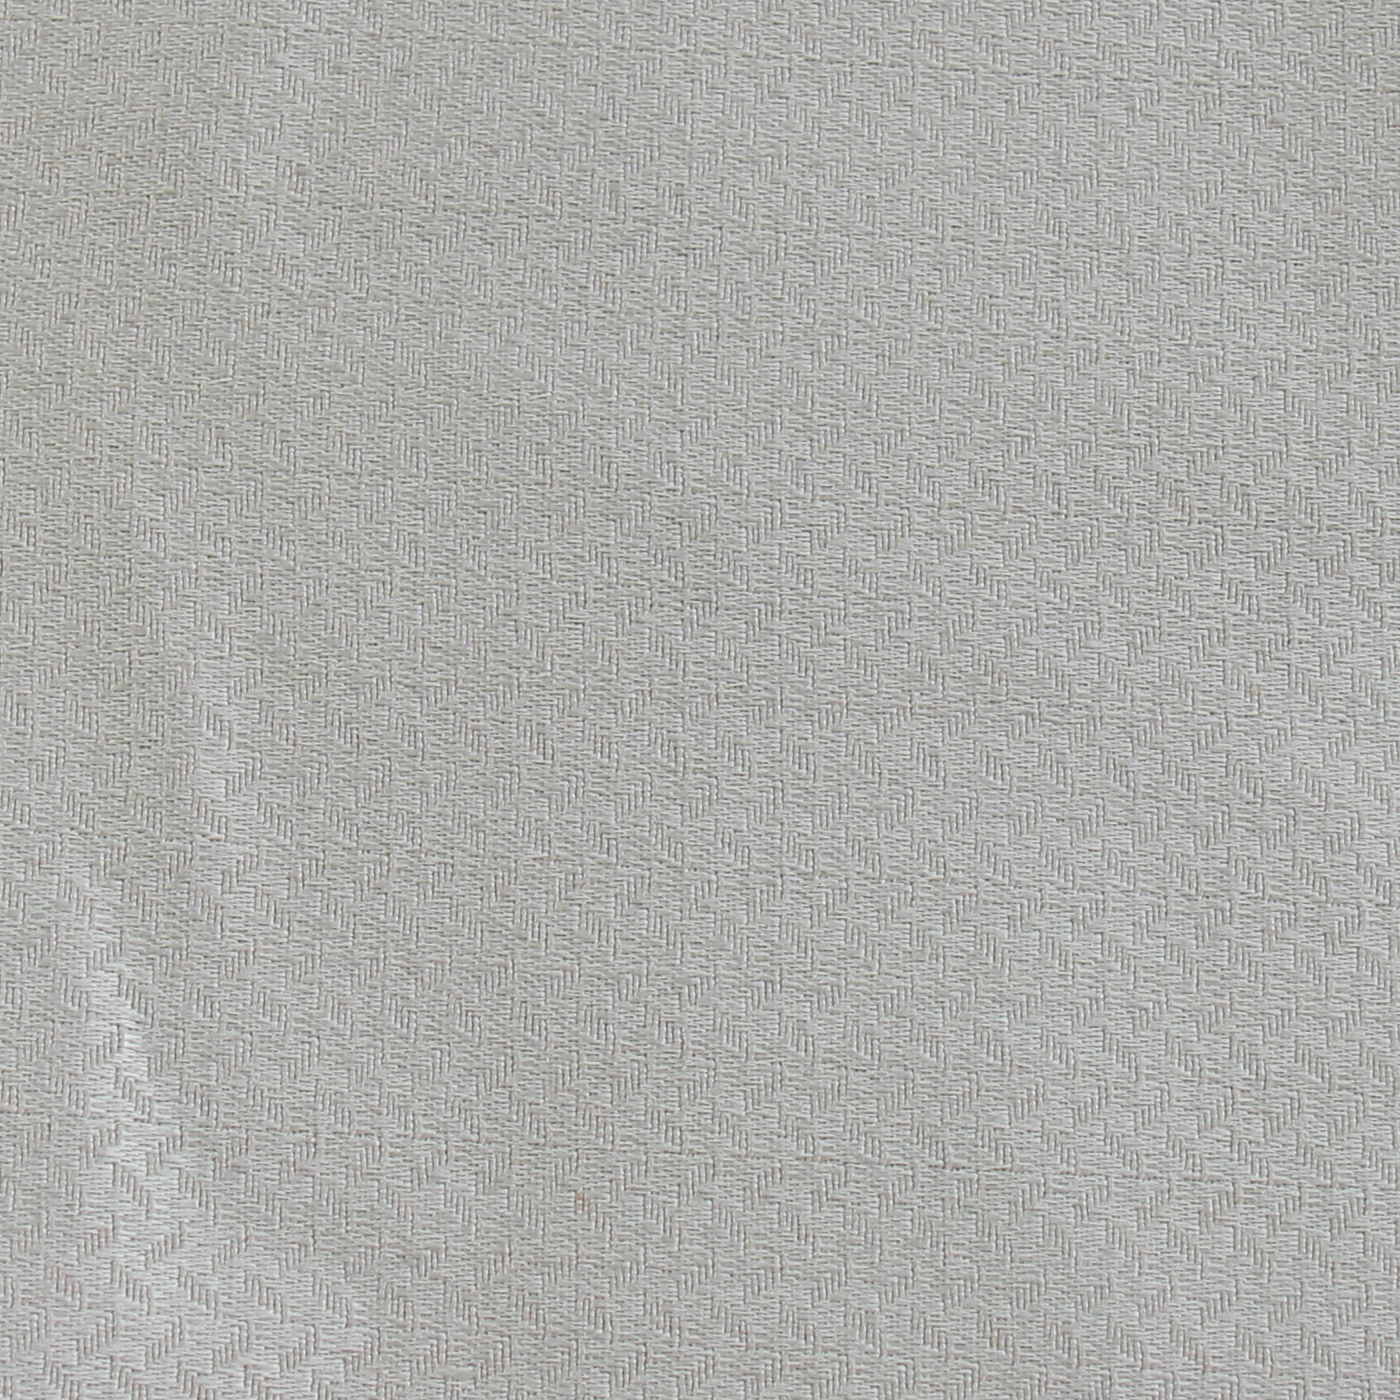 NO 29-45 RS X1 NO 12 Fabric Upholstery Sample